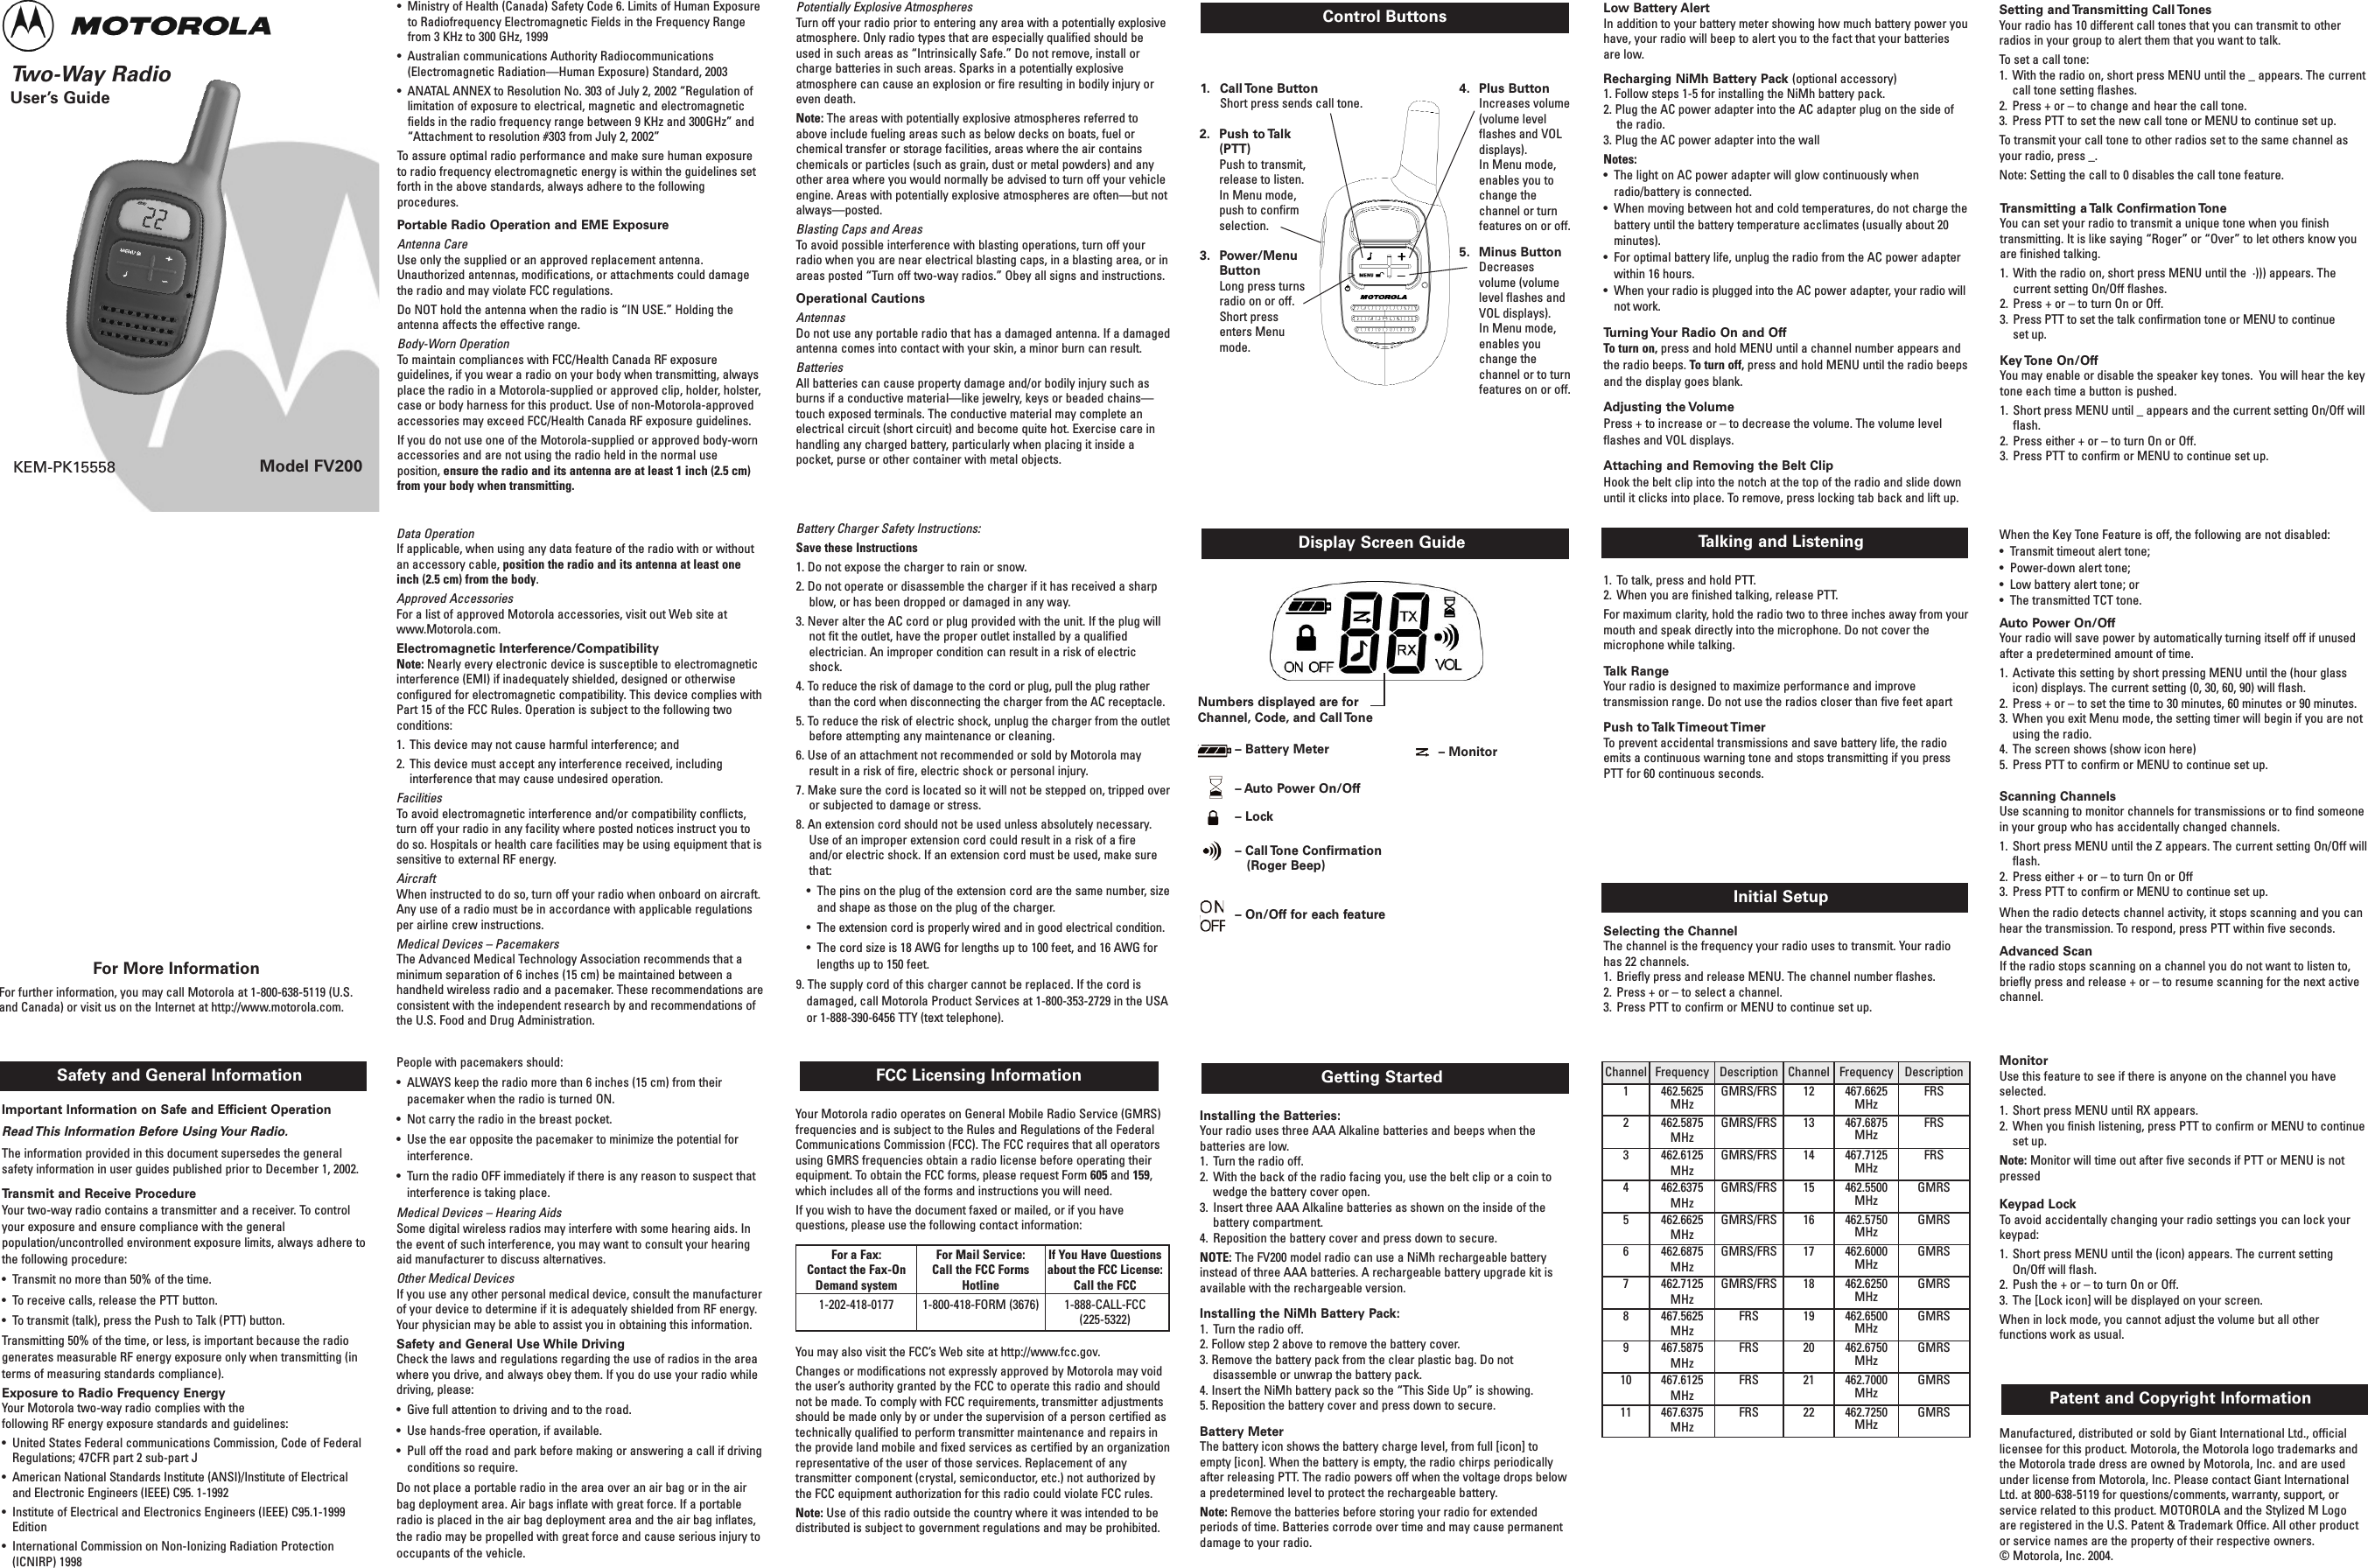 Two-Way Radio User’s GuideModel FV200Safety and General Information FCC Licensing InformationControl ButtonsKEM-PK15558Important Information on Safe and Efficient OperationRead This Information Before Using Your Radio.The information provided in this document supersedes the generalsafety information in user guides published prior to December 1, 2002.Transmit and Receive Procedure Your two-way radio contains a transmitter and a receiver. To controlyour exposure and ensure compliance with the generalpopulation/uncontrolled environment exposure limits, always adhere tothe following procedure:•  Transmit no more than 50% of the time.•  To receive calls, release the PTT button.•  To transmit (talk), press the Push to Talk (PTT) button.Transmitting 50% of the time, or less, is important because the radiogenerates measurable RF energy exposure only when transmitting (interms of measuring standards compliance). Exposure to Radio Frequency Energy Your Motorola two-way radio complies with the following RF energy exposure standards and guidelines:•  United States Federal communications Commission, Code of FederalRegulations; 47CFR part 2 sub-part J•  American National Standards Institute (ANSI)/Institute of Electricaland Electronic Engineers (IEEE) C95. 1-1992•  Institute of Electrical and Electronics Engineers (IEEE) C95.1-1999Edition•  International Commission on Non-Ionizing Radiation Protection(ICNIRP) 1998Getting StartedDisplay Screen GuideInstalling the Batteries:Your radio uses three AAA Alkaline batteries and beeps when thebatteries are low.1.  Turn the radio off.2.  With the back of the radio facing you, use the belt clip or a coin towedge the battery cover open.3.  Insert three AAA Alkaline batteries as shown on the inside of thebattery compartment.4.  Reposition the battery cover and press down to secure.NOTE: The FV200 model radio can use a NiMh rechargeable batteryinstead of three AAA batteries. A rechargeable battery upgrade kit isavailable with the rechargeable version. Installing the NiMh Battery Pack:1.  Turn the radio off.2. Follow step 2 above to remove the battery cover.3. Remove the battery pack from the clear plastic bag. Do notdisassemble or unwrap the battery pack.4. Insert the NiMh battery pack so the “This Side Up” is showing.5. Reposition the battery cover and press down to secure.Battery Meter The battery icon shows the battery charge level, from full [icon] toempty [icon]. When the battery is empty, the radio chirps periodicallyafter releasing PTT. The radio powers off when the voltage drops belowa predetermined level to protect the rechargeable battery. Note: Remove the batteries before storing your radio for extendedperiods of time. Batteries corrode over time and may cause permanentdamage to your radio.Talking and Listening1.  To talk, press and hold PTT. 2.  When you are finished talking, release PTT. For maximum clarity, hold the radio two to three inches away from yourmouth and speak directly into the microphone. Do not cover themicrophone while talking.Talk RangeYour radio is designed to maximize performance and improvetransmission range. Do not use the radios closer than five feet apartPush  to Talk Timeout Timer To prevent accidental transmissions and save battery life, the radioemits a continuous warning tone and stops transmitting if you pressPTT for 60 continuous seconds.Low Battery Alert In addition to your battery meter showing how much battery power youhave, your radio will beep to alert you to the fact that your batteriesare low.  Recharging NiMh Battery Pack (optional accessory)1. Follow steps 1-5 for installing the NiMh battery pack. 2. Plug the AC power adapter into the AC adapter plug on the side ofthe radio.  3. Plug the AC power adapter into the wallNotes:•  The light on AC power adapter will glow continuously whenradio/battery is connected. •  When moving between hot and cold temperatures, do not charge thebattery until the battery temperature acclimates (usually about 20minutes).•  For optimal battery life, unplug the radio from the AC power adapterwithin 16 hours. •  When your radio is plugged into the AC power adapter, your radio willnot work.Turning Your Radio On and OffTo turn on, press and hold MENU until a channel number appears andthe radio beeps. To turn off, press and hold MENU until the radio beepsand the display goes blank.Adjusting the VolumePress + to increase or – to decrease the volume. The volume levelflashes and VOL displays.Attaching and Removing the Belt Clip Hook the belt clip into the notch at the top of the radio and slide downuntil it clicks into place. To remove, press locking tab back and lift up. Initial SetupSelecting the ChannelThe channel is the frequency your radio uses to transmit. Your radiohas 22 channels.1.  Briefly press and release MENU. The channel number flashes.2.  Press + or – to select a channel.3.  Press PTT to confirm or MENU to continue set up.Manufactured, distributed or sold by Giant International Ltd., officiallicensee for this product. Motorola, the Motorola logo trademarks andthe Motorola trade dress are owned by Motorola, Inc. and are usedunder license from Motorola, Inc. Please contact Giant InternationalLtd. at 800-638-5119 for questions/comments, warranty, support, orservice related to this product. MOTOROLA and the Stylized M Logoare registered in the U.S. Patent &amp; Trademark Office. All other productor service names are the property of their respective owners. © Motorola, Inc. 2004.Patent and Copyright Information For More InformationFor further information, you may call Motorola at 1-800-638-5119 (U.S.and Canada) or visit us on the Internet at http://www.motorola.com. Setting and Transmitting Call TonesYour radio has 10 different call tones that you can transmit to otherradios in your group to alert them that you want to talk. To set a call tone:1.  With the radio on, short press MENU until the _ appears. The currentcall tone setting flashes.2.  Press + or – to change and hear the call tone.3.  Press PTT to set the new call tone or MENU to continue set up.To transmit your call tone to other radios set to the same channel asyour radio, press _.Note: Setting the call to 0 disables the call tone feature.Transmitting a Talk Confirmation ToneYou can set your radio to transmit a unique tone when you finishtransmitting. It is like saying “Roger” or “Over” to let others know youare finished talking.1.  With the radio on, short press MENU until the  ·))) appears. Thecurrent setting On/Off flashes.2.  Press + or – to turn On or Off.3.  Press PTT to set the talk confirmation tone or MENU to continue set up.Key Tone  On/OffYou may enable or disable the speaker key tones.  You will hear the keytone each time a button is pushed.1.  Short press MENU until _ appears and the current setting On/Off willflash.2.  Press either + or – to turn On or Off.3.  Press PTT to confirm or MENU to continue set up.When the Key Tone Feature is off, the following are not disabled:•  Transmit timeout alert tone;•  Power-down alert tone;•  Low battery alert tone; or •  The transmitted TCT tone. Auto Power On/OffYour radio will save power by automatically turning itself off if unusedafter a predetermined amount of time. 1.  Activate this setting by short pressing MENU until the (hour glassicon) displays. The current setting (0, 30, 60, 90) will flash.2.  Press + or – to set the time to 30 minutes, 60 minutes or 90 minutes. 3.  When you exit Menu mode, the setting timer will begin if you are notusing the radio.4.  The screen shows (show icon here) 5.  Press PTT to confirm or MENU to continue set up.Scanning ChannelsUse scanning to monitor channels for transmissions or to find someonein your group who has accidentally changed channels.1.  Short press MENU until the Z appears. The current setting On/Off willflash.2.  Press either + or – to turn On or Off3.  Press PTT to confirm or MENU to continue set up.When the radio detects channel activity, it stops scanning and you canhear the transmission. To respond, press PTT within five seconds.Advanced ScanIf the radio stops scanning on a channel you do not want to listen to,briefly press and release + or – to resume scanning for the next activechannel.Monitor Use this feature to see if there is anyone on the channel you haveselected.1.  Short press MENU until RX appears. 2.  When you finish listening, press PTT to confirm or MENU to continueset up.Note: Monitor will time out after five seconds if PTT or MENU is notpressedKeypad LockTo avoid accidentally changing your radio settings you can lock yourkeypad: 1.  Short press MENU until the (icon) appears. The current settingOn/Off will flash.2.  Push the + or – to turn On or Off.3.  The [Lock icon] will be displayed on your screen. When in lock mode, you cannot adjust the volume but all otherfunctions work as usual.1. Call Tone  Button Short press sends call tone.2. Push to Talk(PTT)Push to transmit,release to listen.In Menu mode,push to confirmselection.3. Power/MenuButtonLong press turnsradio on or off.Short pressenters Menumode.4. Plus ButtonIncreases volume(volume levelflashes and VOLdisplays).In Menu mode,enables you tochange thechannel or turn features on or off.5. Minus ButtonDecreasesvolume (volumelevel flashes andVOL displays).In Menu mode,enables youchange thechannel or to turnfeatures on or off.•  Ministry of Health (Canada) Safety Code 6. Limits of Human Exposureto Radiofrequency Electromagnetic Fields in the Frequency Rangefrom 3 KHz to 300 GHz, 1999•  Australian communications Authority Radiocommunications(Electromagnetic Radiation—Human Exposure) Standard, 2003•  ANATAL ANNEX to Resolution No. 303 of July 2, 2002 “Regulation oflimitation of exposure to electrical, magnetic and electromagneticfields in the radio frequency range between 9 KHz and 300GHz” and“Attachment to resolution #303 from July 2, 2002”To assure optimal radio performance and make sure human exposureto radio frequency electromagnetic energy is within the guidelines setforth in the above standards, always adhere to the followingprocedures.Portable Radio Operation and EME ExposureAntenna CareUse only the supplied or an approved replacement antenna.Unauthorized antennas, modifications, or attachments could damagethe radio and may violate FCC regulations.Do NOT hold the antenna when the radio is “IN USE.” Holding theantenna affects the effective range. Body-Worn OperationTo maintain compliances with FCC/Health Canada RF exposureguidelines, if you wear a radio on your body when transmitting, alwaysplace the radio in a Motorola-supplied or approved clip, holder, holster,case or body harness for this product. Use of non-Motorola-approvedaccessories may exceed FCC/Health Canada RF exposure guidelines. If you do not use one of the Motorola-supplied or approved body-wornaccessories and are not using the radio held in the normal useposition, ensure the radio and its antenna are at least 1 inch (2.5 cm)from your body when transmitting.Battery Charger Safety Instructions:Save these Instructions1. Do not expose the charger to rain or snow.2. Do not operate or disassemble the charger if it has received a sharpblow, or has been dropped or damaged in any way.3. Never alter the AC cord or plug provided with the unit. If the plug willnot fit the outlet, have the proper outlet installed by a qualifiedelectrician. An improper condition can result in a risk of electricshock.4. To reduce the risk of damage to the cord or plug, pull the plug ratherthan the cord when disconnecting the charger from the AC receptacle.5. To reduce the risk of electric shock, unplug the charger from the outletbefore attempting any maintenance or cleaning.6. Use of an attachment not recommended or sold by Motorola mayresult in a risk of fire, electric shock or personal injury.7. Make sure the cord is located so it will not be stepped on, tripped overor subjected to damage or stress.8. An extension cord should not be used unless absolutely necessary.Use of an improper extension cord could result in a risk of a fireand/or electric shock. If an extension cord must be used, make surethat:•  The pins on the plug of the extension cord are the same number, sizeand shape as those on the plug of the charger.•  The extension cord is properly wired and in good electrical condition.•  The cord size is 18 AWG for lengths up to 100 feet, and 16 AWG forlengths up to 150 feet.9. The supply cord of this charger cannot be replaced. If the cord isdamaged, call Motorola Product Services at 1-800-353-2729 in the USAor 1-888-390-6456 TTY (text telephone).Potentially Explosive AtmospheresTurn off your radio prior to entering any area with a potentially explosiveatmosphere. Only radio types that are especially qualified should beused in such areas as “Intrinsically Safe.” Do not remove, install orcharge batteries in such areas. Sparks in a potentially explosiveatmosphere can cause an explosion or fire resulting in bodily injury oreven death. Note: The areas with potentially explosive atmospheres referred toabove include fueling areas such as below decks on boats, fuel orchemical transfer or storage facilities, areas where the air containschemicals or particles (such as grain, dust or metal powders) and anyother area where you would normally be advised to turn off your vehicleengine. Areas with potentially explosive atmospheres are often—but notalways—posted.Blasting Caps and AreasTo avoid possible interference with blasting operations, turn off yourradio when you are near electrical blasting caps, in a blasting area, or inareas posted “Turn off two-way radios.” Obey all signs and instructions.Operational CautionsAntennasDo not use any portable radio that has a damaged antenna. If a damagedantenna comes into contact with your skin, a minor burn can result.BatteriesAll batteries can cause property damage and/or bodily injury such asburns if a conductive material—like jewelry, keys or beaded chains—touch exposed terminals. The conductive material may complete anelectrical circuit (short circuit) and become quite hot. Exercise care inhandling any charged battery, particularly when placing it inside apocket, purse or other container with metal objects.Your Motorola radio operates on General Mobile Radio Service (GMRS)frequencies and is subject to the Rules and Regulations of the FederalCommunications Commission (FCC). The FCC requires that all operatorsusing GMRS frequencies obtain a radio license before operating theirequipment. To obtain the FCC forms, please request Form 605 and 159,which includes all of the forms and instructions you will need.If you wish to have the document faxed or mailed, or if you havequestions, please use the following contact information:You may also visit the FCC’s Web site at http://www.fcc.gov. Changes or modifications not expressly approved by Motorola may voidthe user’s authority granted by the FCC to operate this radio and shouldnot be made. To comply with FCC requirements, transmitter adjustmentsshould be made only by or under the supervision of a person certified astechnically qualified to perform transmitter maintenance and repairs inthe provide land mobile and fixed services as certified by an organizationrepresentative of the user of those services. Replacement of anytransmitter component (crystal, semiconductor, etc.) not authorized bythe FCC equipment authorization for this radio could violate FCC rules.Note: Use of this radio outside the country where it was intended to bedistributed is subject to government regulations and may be prohibited.Data OperationIf applicable, when using any data feature of the radio with or withoutan accessory cable, position the radio and its antenna at least oneinch (2.5 cm) from the body.Approved AccessoriesFor a list of approved Motorola accessories, visit out Web site atwww.Motorola.com. Electromagnetic Interference/CompatibilityNote: Nearly every electronic device is susceptible to electromagneticinterference (EMI) if inadequately shielded, designed or otherwiseconfigured for electromagnetic compatibility. This device complies withPart 15 of the FCC Rules. Operation is subject to the following twoconditions:1.  This device may not cause harmful interference; and 2.  This device must accept any interference received, includinginterference that may cause undesired operation.FacilitiesTo avoid electromagnetic interference and/or compatibility conflicts,turn off your radio in any facility where posted notices instruct you todo so. Hospitals or health care facilities may be using equipment that issensitive to external RF energy.AircraftWhen instructed to do so, turn off your radio when onboard on aircraft.Any use of a radio must be in accordance with applicable regulationsper airline crew instructions.Medical Devices – Pacemakers The Advanced Medical Technology Association recommends that aminimum separation of 6 inches (15 cm) be maintained between ahandheld wireless radio and a pacemaker. These recommendations areconsistent with the independent research by and recommendations ofthe U.S. Food and Drug Administration.People with pacemakers should:•  ALWAYS keep the radio more than 6 inches (15 cm) from theirpacemaker when the radio is turned ON. •  Not carry the radio in the breast pocket.•  Use the ear opposite the pacemaker to minimize the potential forinterference.•  Turn the radio OFF immediately if there is any reason to suspect thatinterference is taking place.Medical Devices – Hearing AidsSome digital wireless radios may interfere with some hearing aids. Inthe event of such interference, you may want to consult your hearingaid manufacturer to discuss alternatives.Other Medical DevicesIf you use any other personal medical device, consult the manufacturerof your device to determine if it is adequately shielded from RF energy.Your physician may be able to assist you in obtaining this information.Safety and General Use While DrivingCheck the laws and regulations regarding the use of radios in the areawhere you drive, and always obey them. If you do use your radio whiledriving, please:•  Give full attention to driving and to the road.•  Use hands-free operation, if available.•  Pull off the road and park before making or answering a call if drivingconditions so require.Do not place a portable radio in the area over an air bag or in the airbag deployment area. Air bags inflate with great force. If a portableradio is placed in the air bag deployment area and the air bag inflates,the radio may be propelled with great force and cause serious injury tooccupants of the vehicle.Channel Frequency Description Channel Frequency Description1462.5625MHzGMRS/FRS 12 467.6625MHzFRS2462.5875MHzGMRS/FRS 13 467.6875MHzFRS3462.6125MHzGMRS/FRS 14 467.7125MHzFRS4462.6375MHzGMRS/FRS 15 462.5500MHzGMRS5462.6625MHzGMRS/FRS 16 462.5750MHzGMRS6462.6875MHzGMRS/FRS 17 462.6000MHzGMRS7462.7125MHzGMRS/FRS 18 462.6250MHzGMRS8467.5625MHzFRS 19 462.6500MHzGMRS9467.5875MHzFRS 20 462.6750MHzGMRS10 467.6125MHzFRS 21 462.7000MHzGMRS11 467.6375MHzFRS 22 462.7250MHzGMRSFor a Fax:Contact the Fax-OnDemand system1-202-418-0177For Mail Service:Call the FCC FormsHotline1-800-418-FORM (3676)If You Have Questionsabout the FCC License:Call the FCC1-888-CALL-FCC(225-5322)– Battery Meter – Monitor– Lock– Call Tone Confirmation (Roger Beep)– On/Off for each feature– Auto Power On/OffNumbers displayed are forChannel, Code, and Call Tone